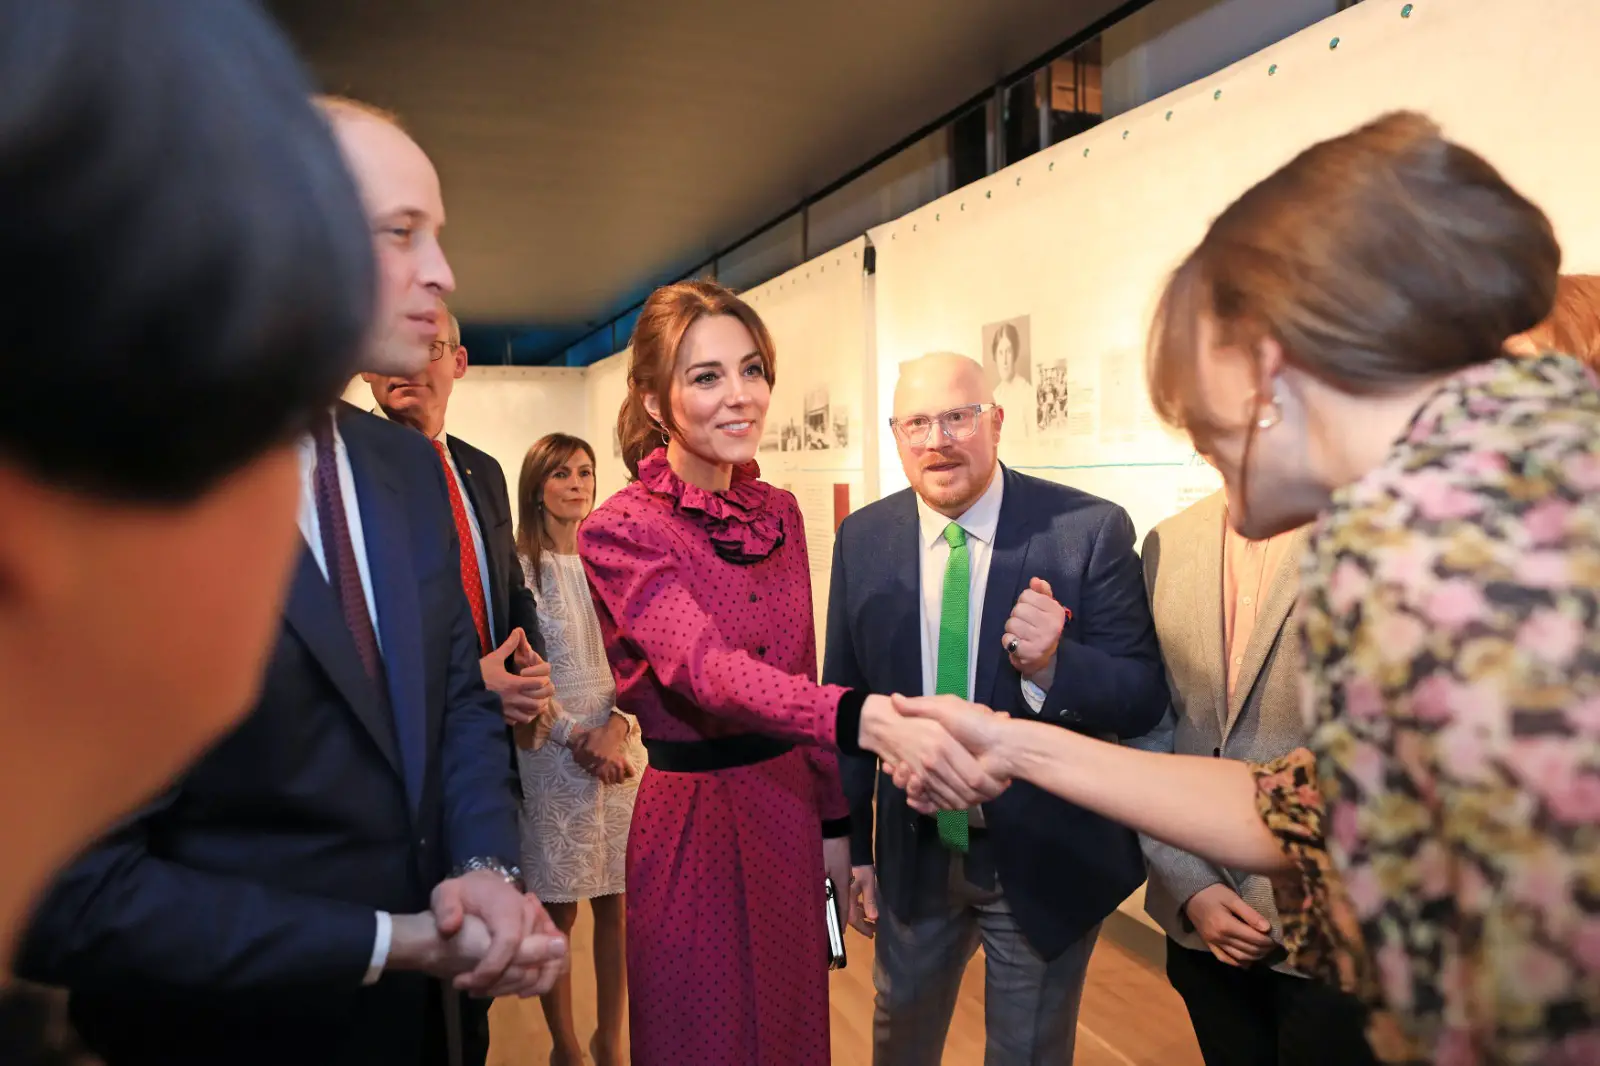 The Duke and Duchess of Cambridge attended the reception hosted at he Museum of Literature Ireland